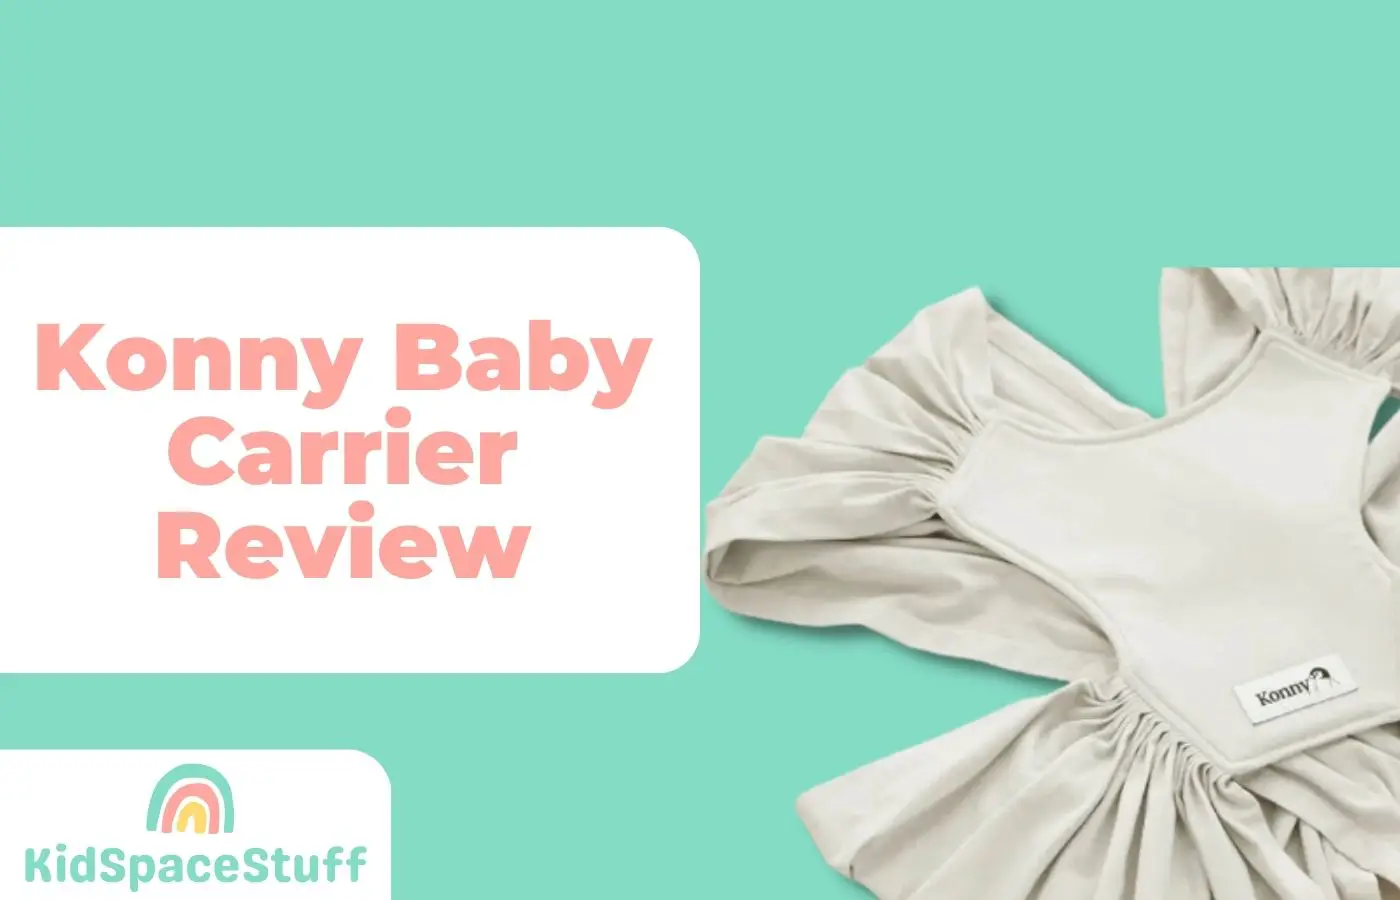 Konny Baby Carrier Review: Should You Buy It? (2023)